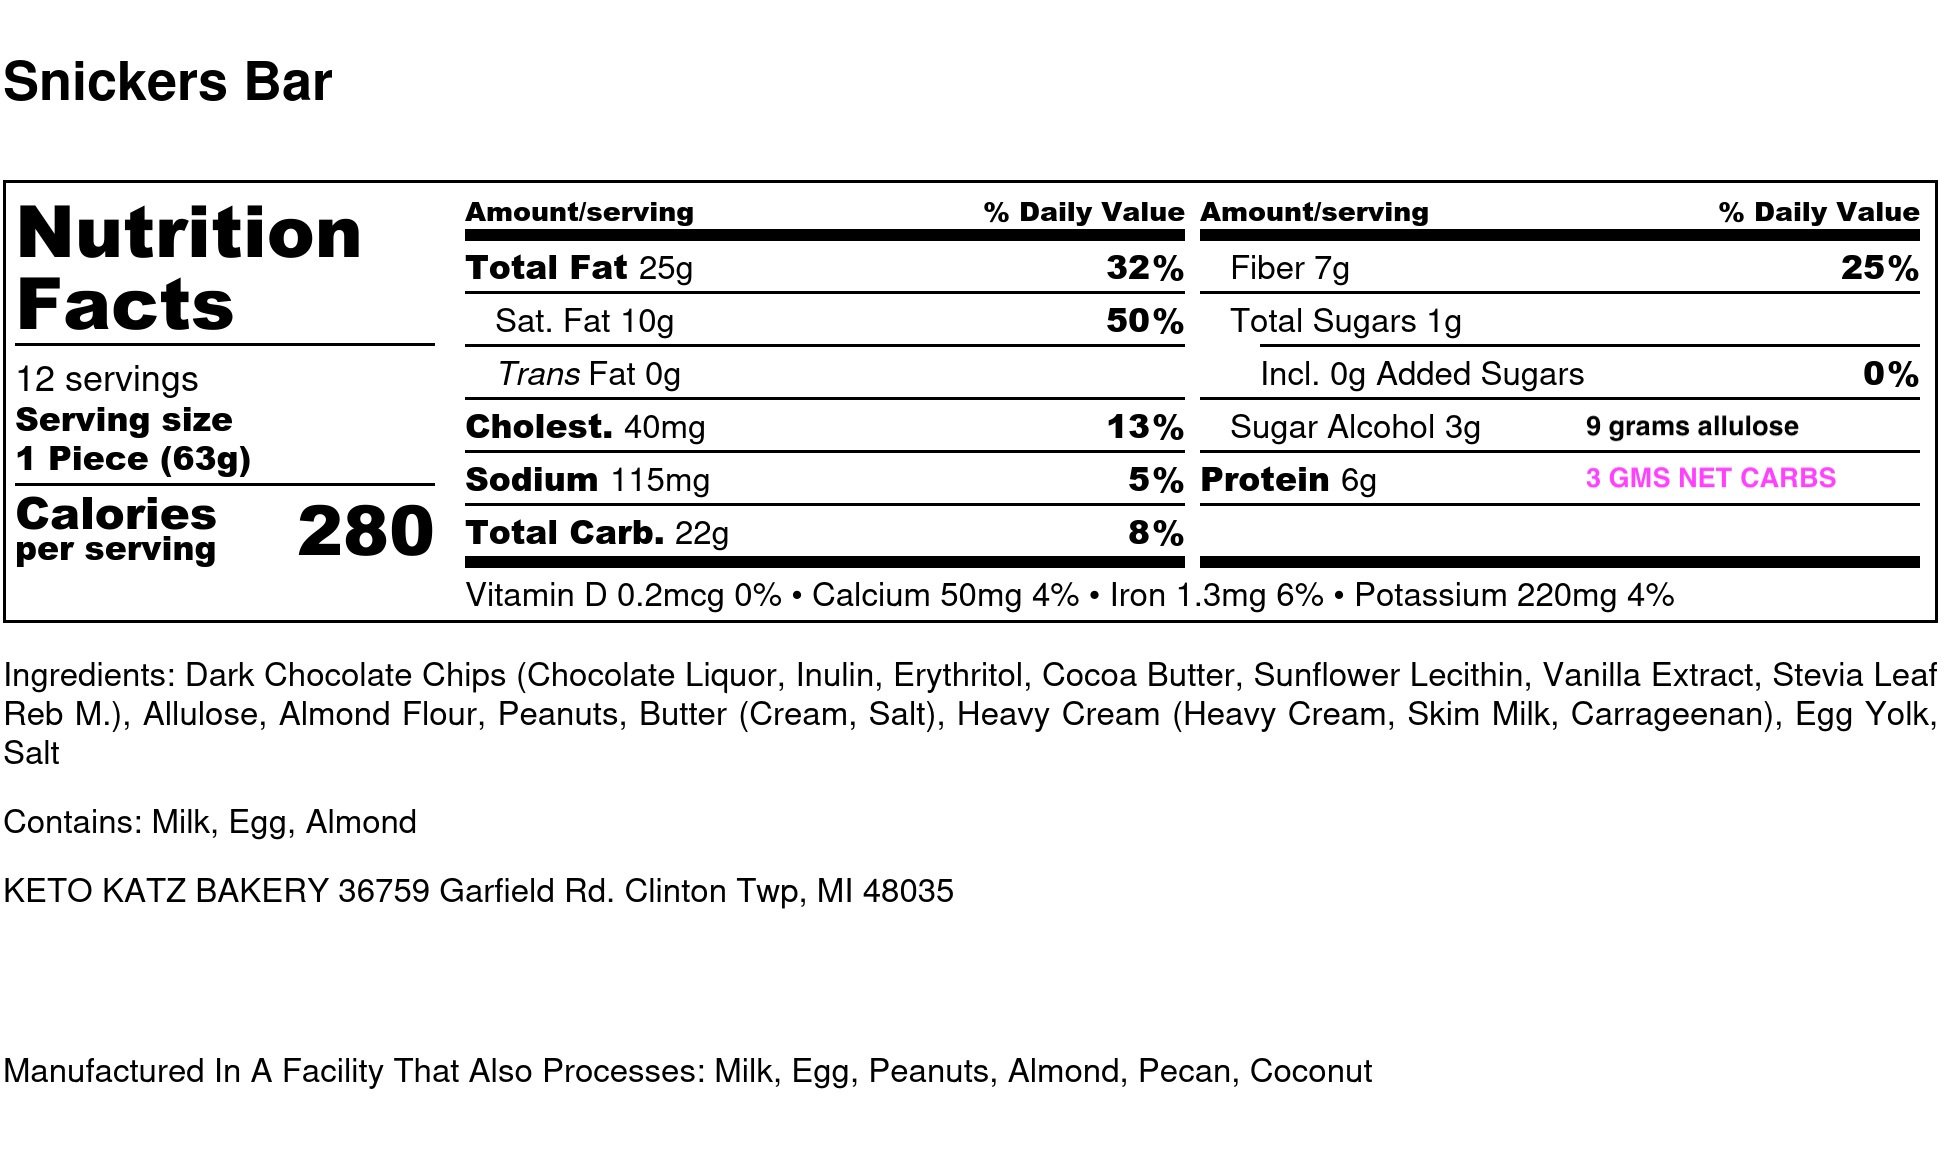 Snickers Bar - Nutrition Label.jpg